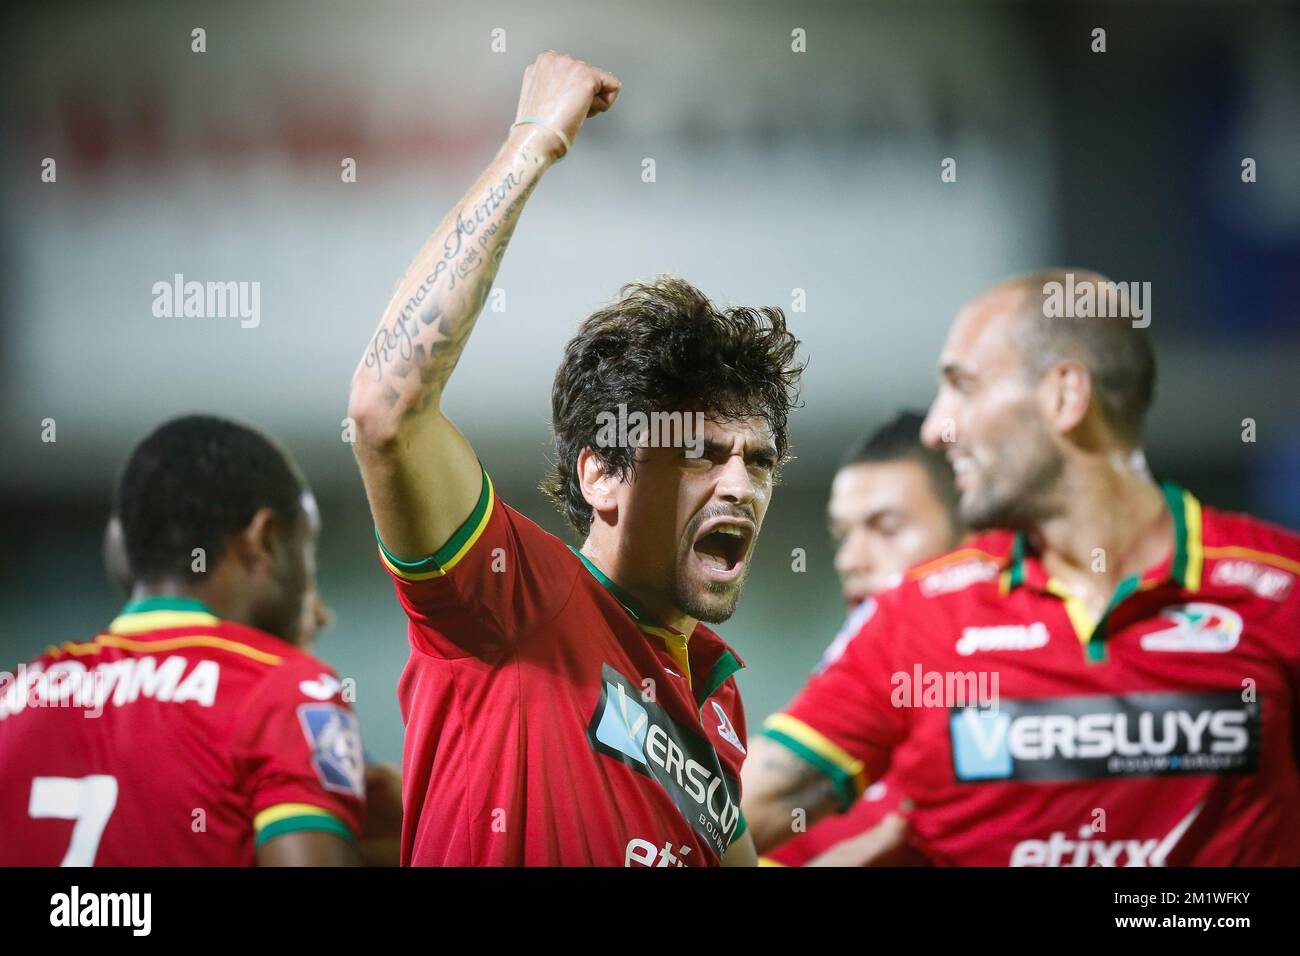 20140928 - OOSTENDE, BELGIUM: Oostende's Fernando Canesin celebrates during the Jupiler Pro League match between KV Oostende and Club Brugge, in Oostende, Sunday 28 September 2014, on the ninth day of the Belgian soccer championship. BELGA PHOTO BRUNO FAHY Stock Photo